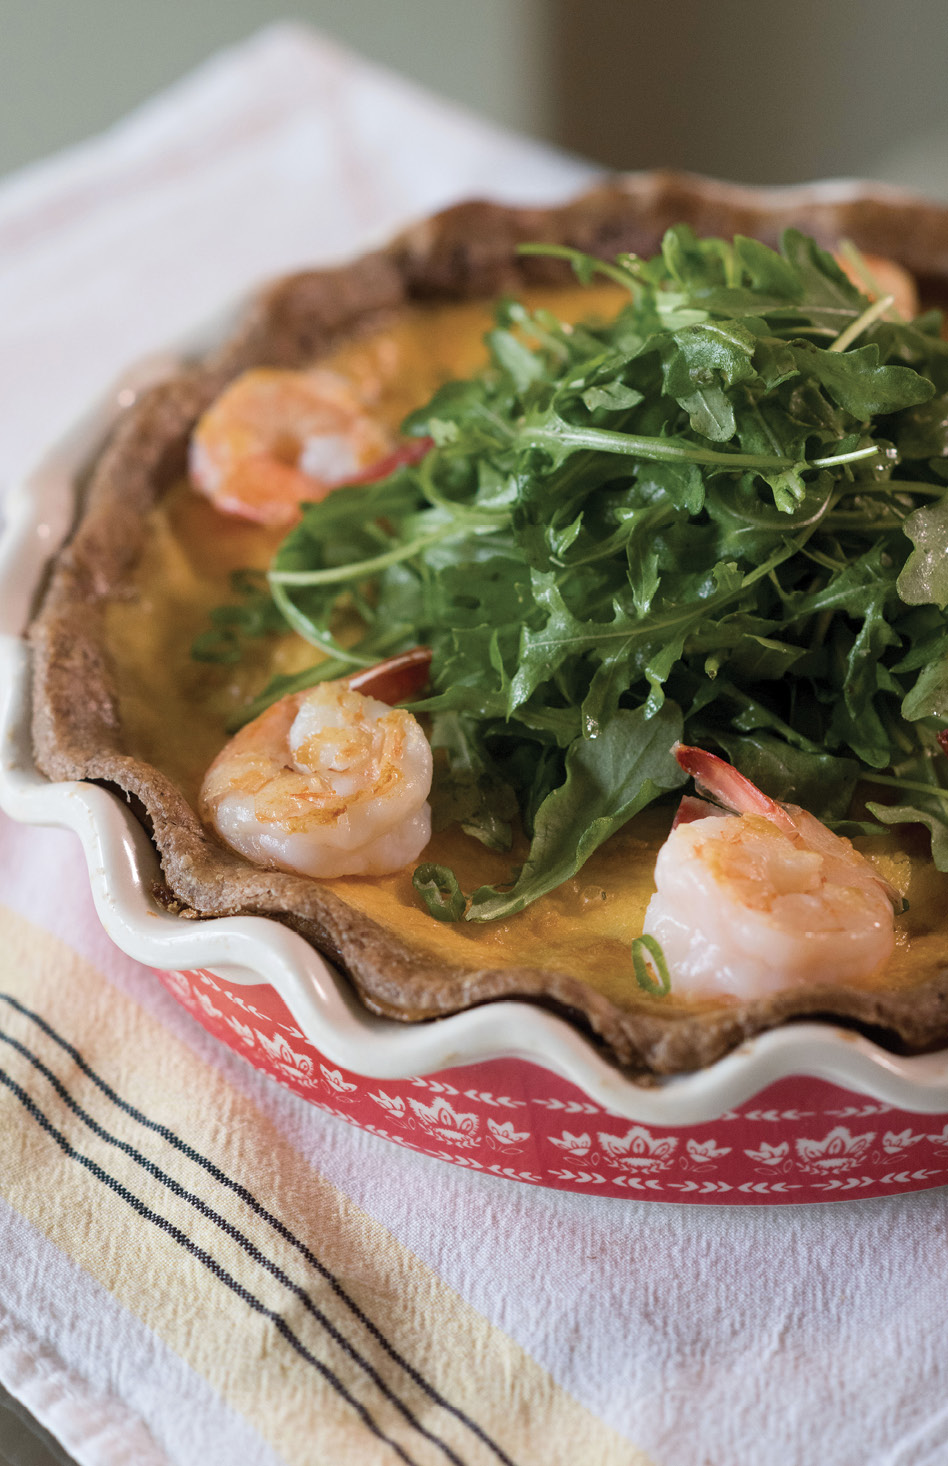 Upchurch saves a few of the shrimp to garnish the quiche; these get cooked a little longer than the rest.